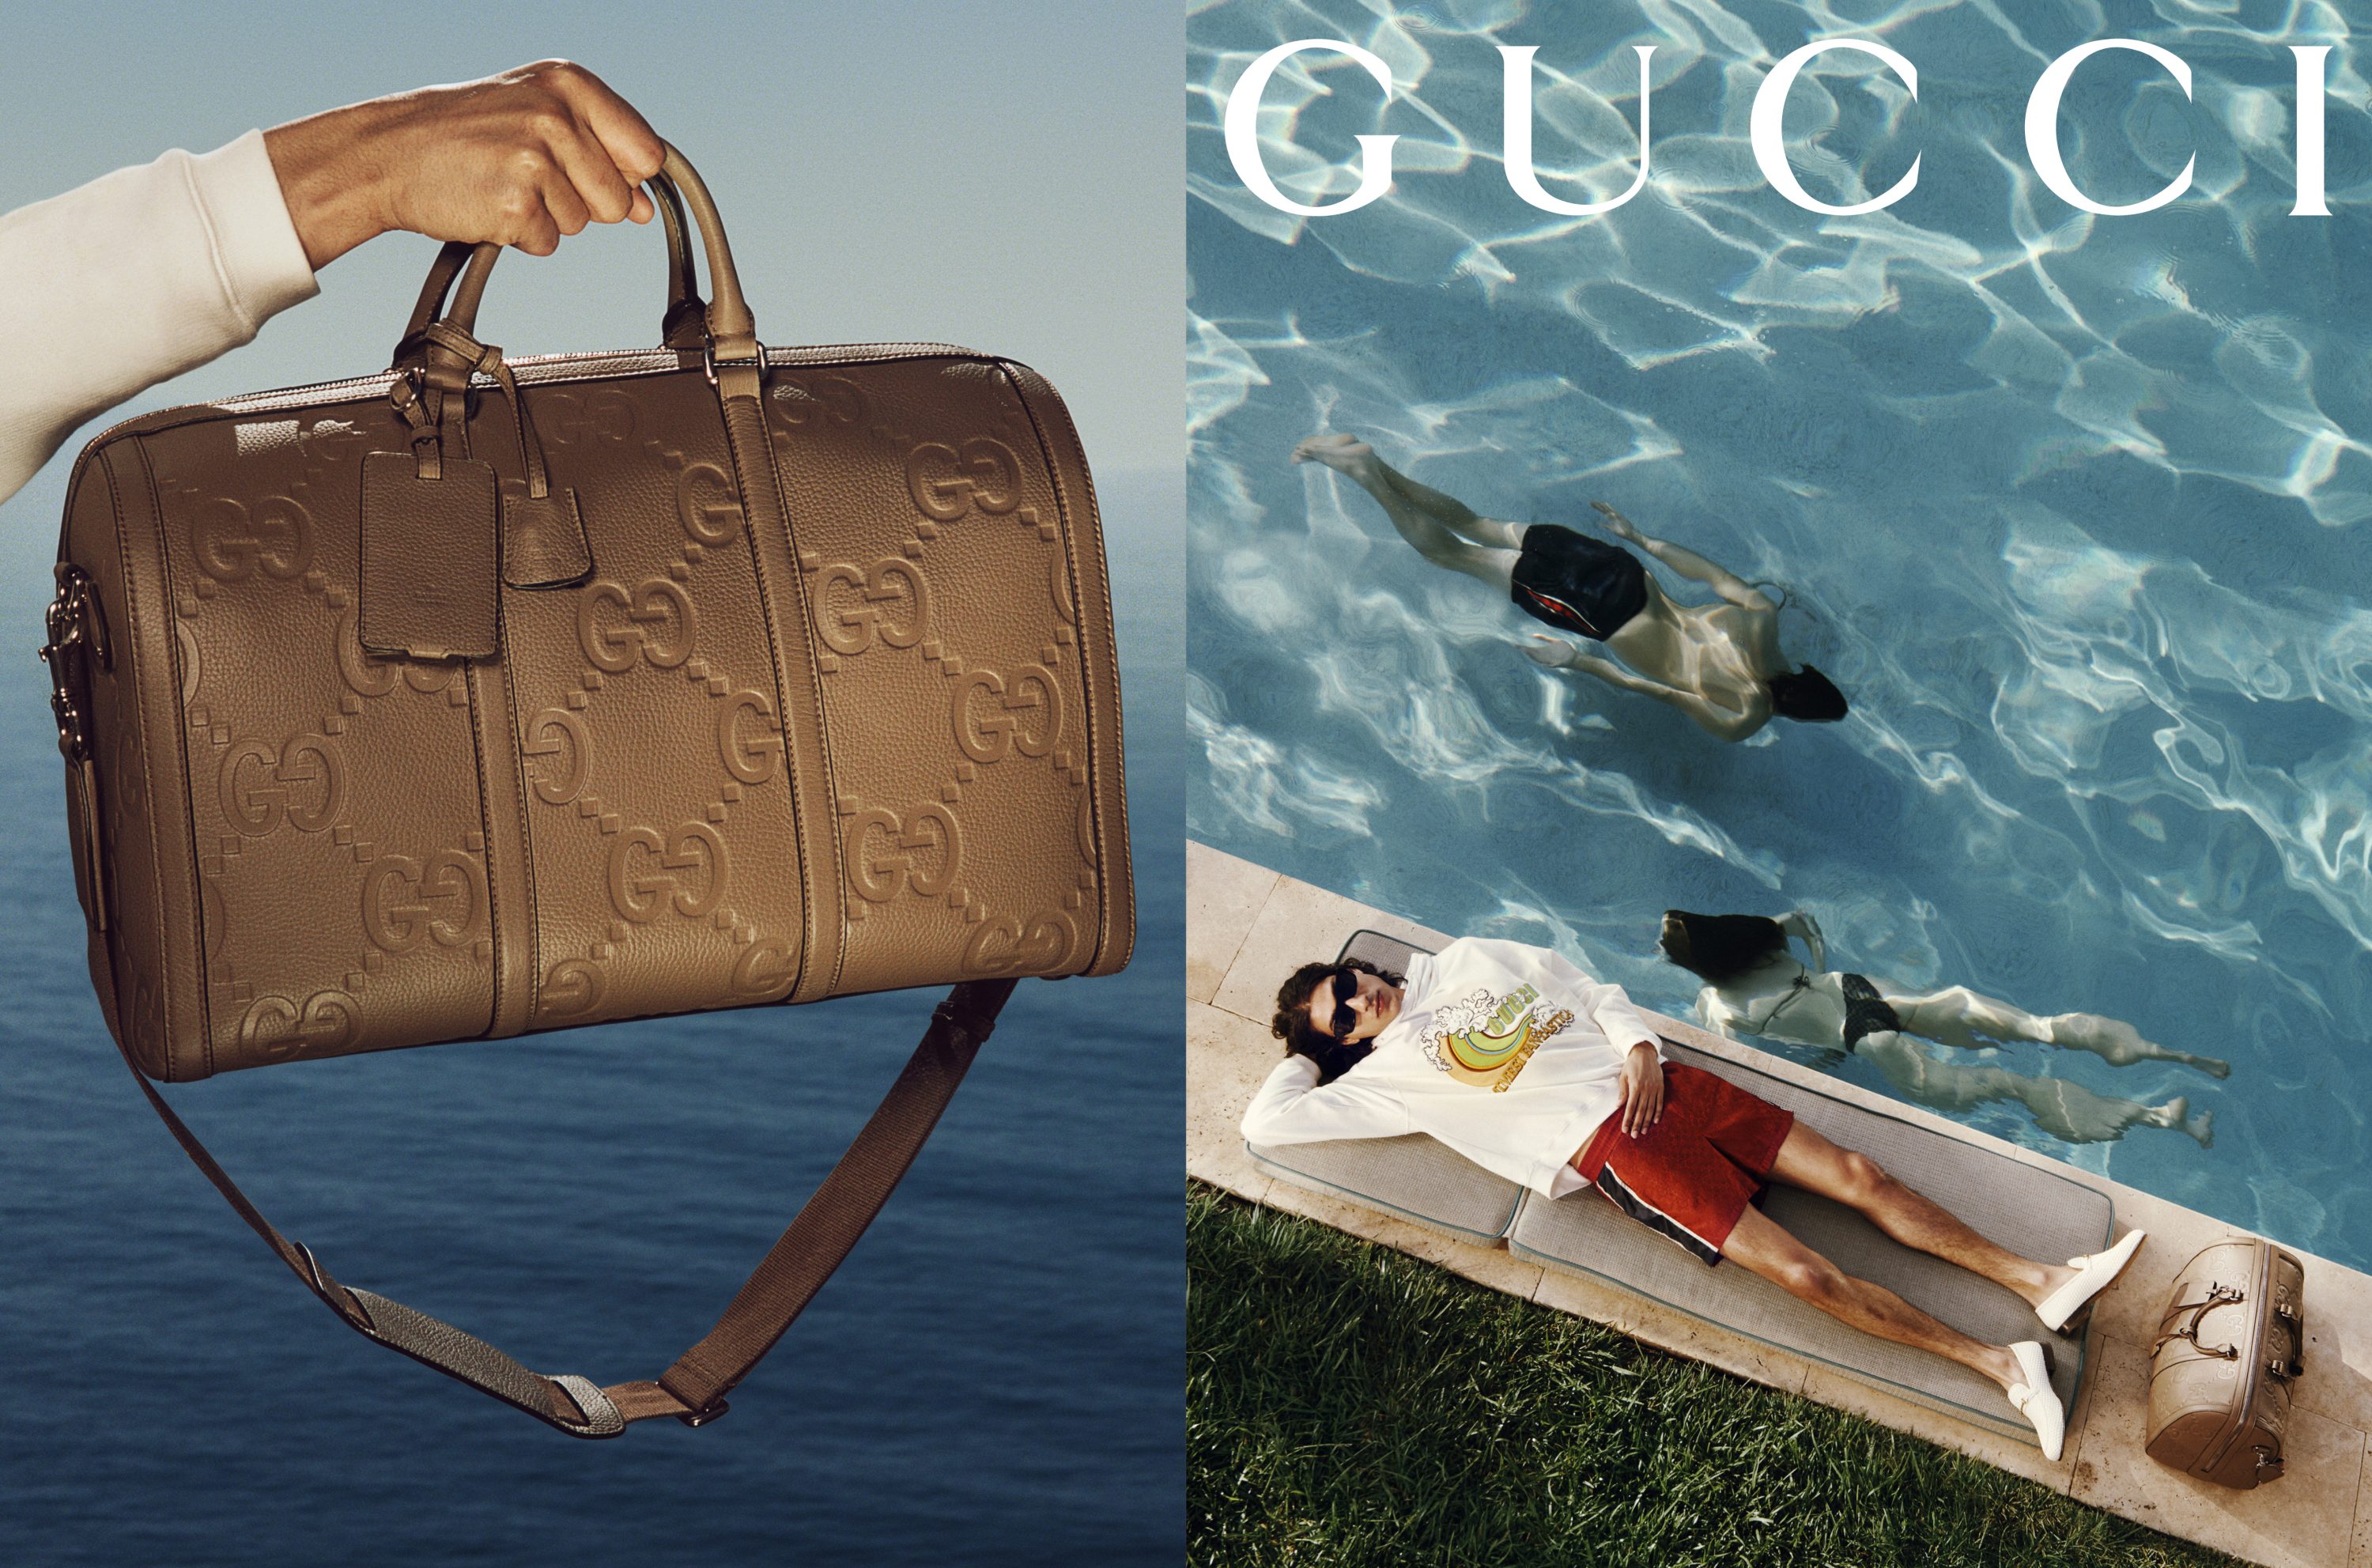 Gucci Stories - Advertising-campaign